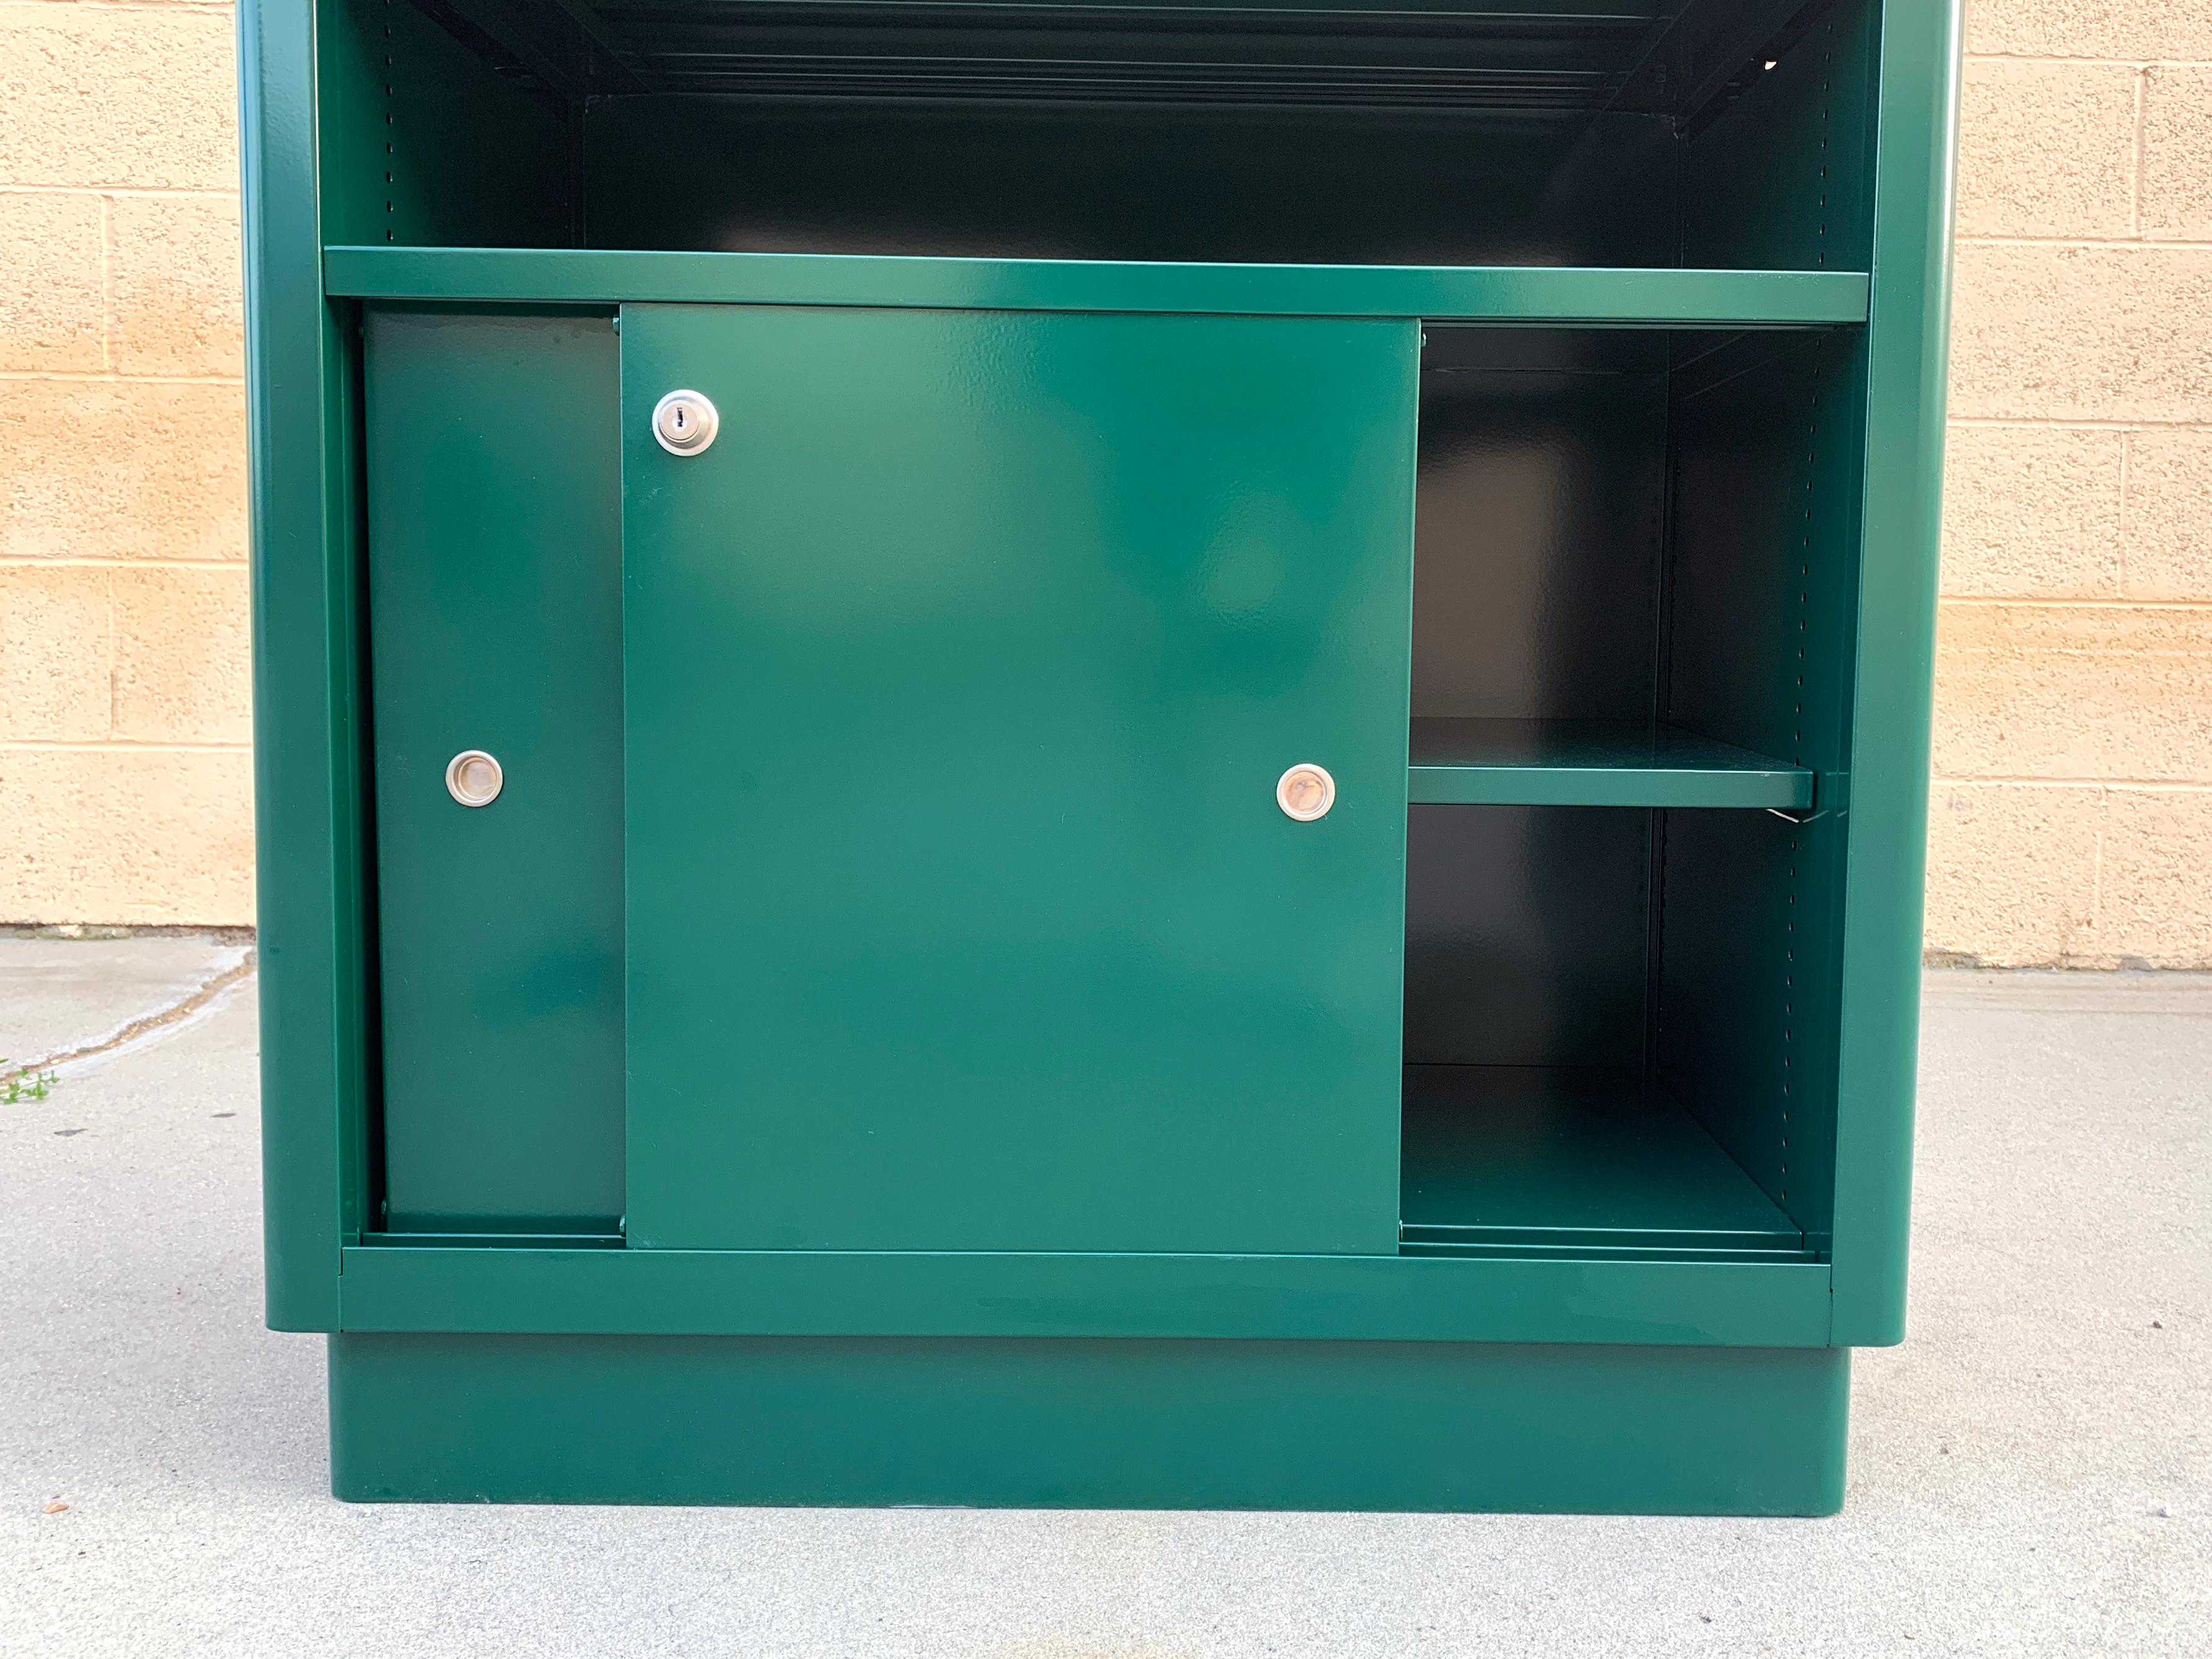 Powder-Coated 1960s McDowell Craig Steel Tanker Office Cabinet Refinished in Forest Green